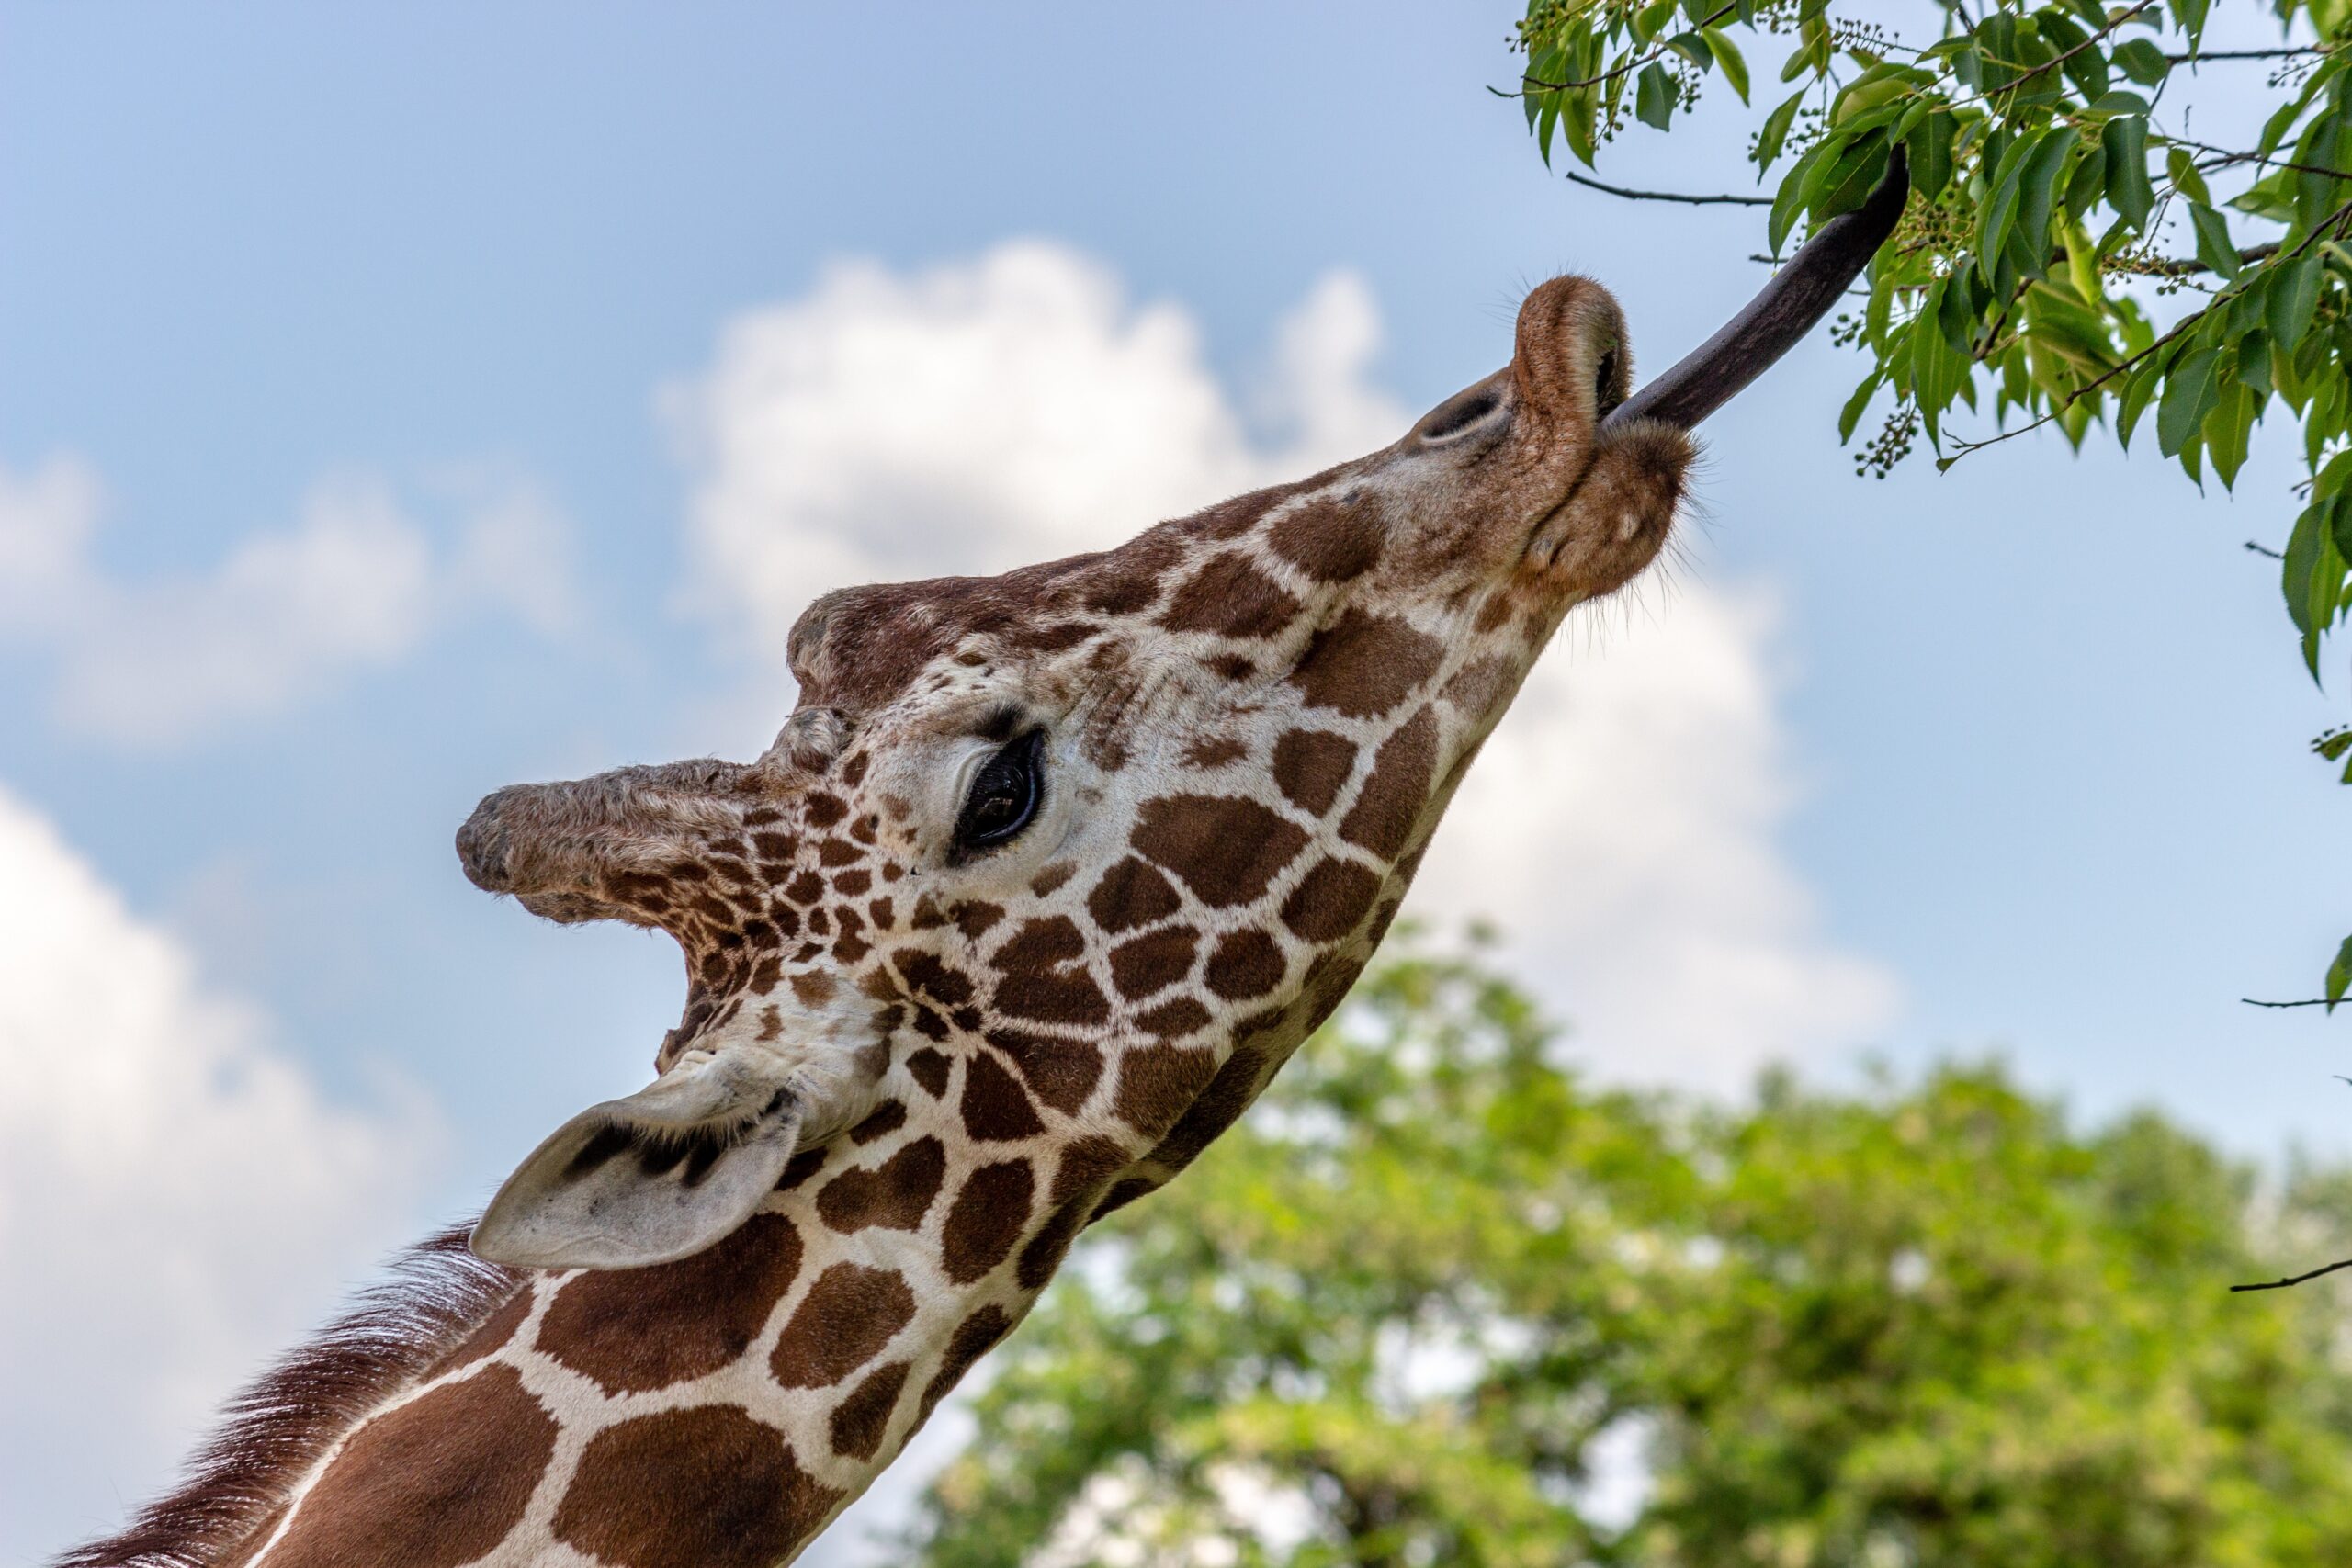 picture of a giraffe stretching out its tongue to eat leaves